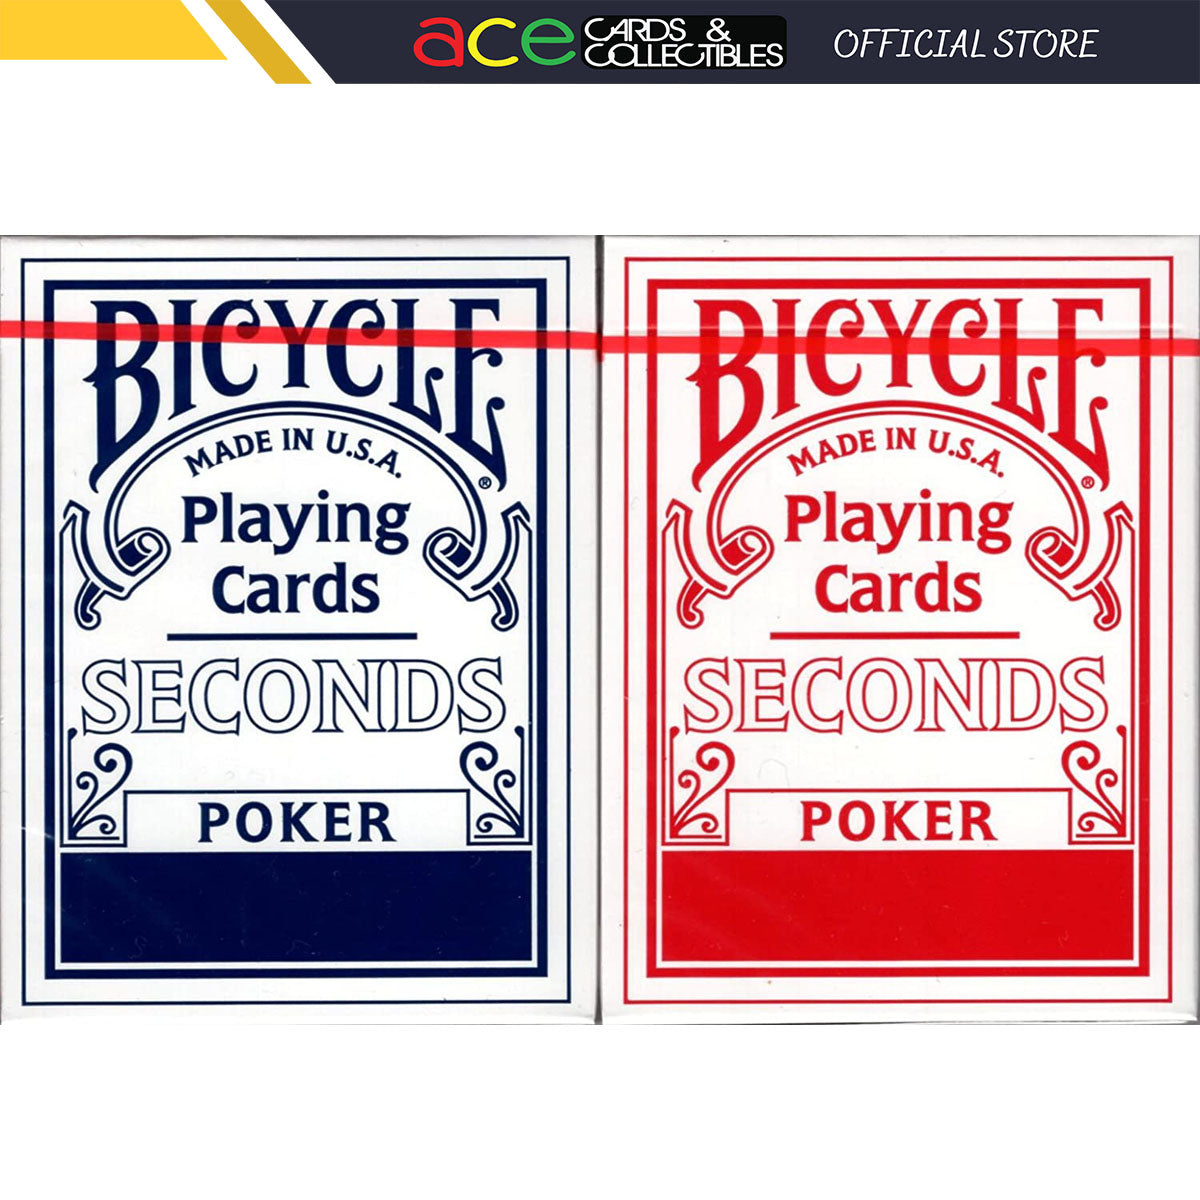  Bicycle Rider Back Playing Cards, Standard Index, Poker Cards,  Premium Playing Cards, 2 Pack, Red & Blue : Toys & Games